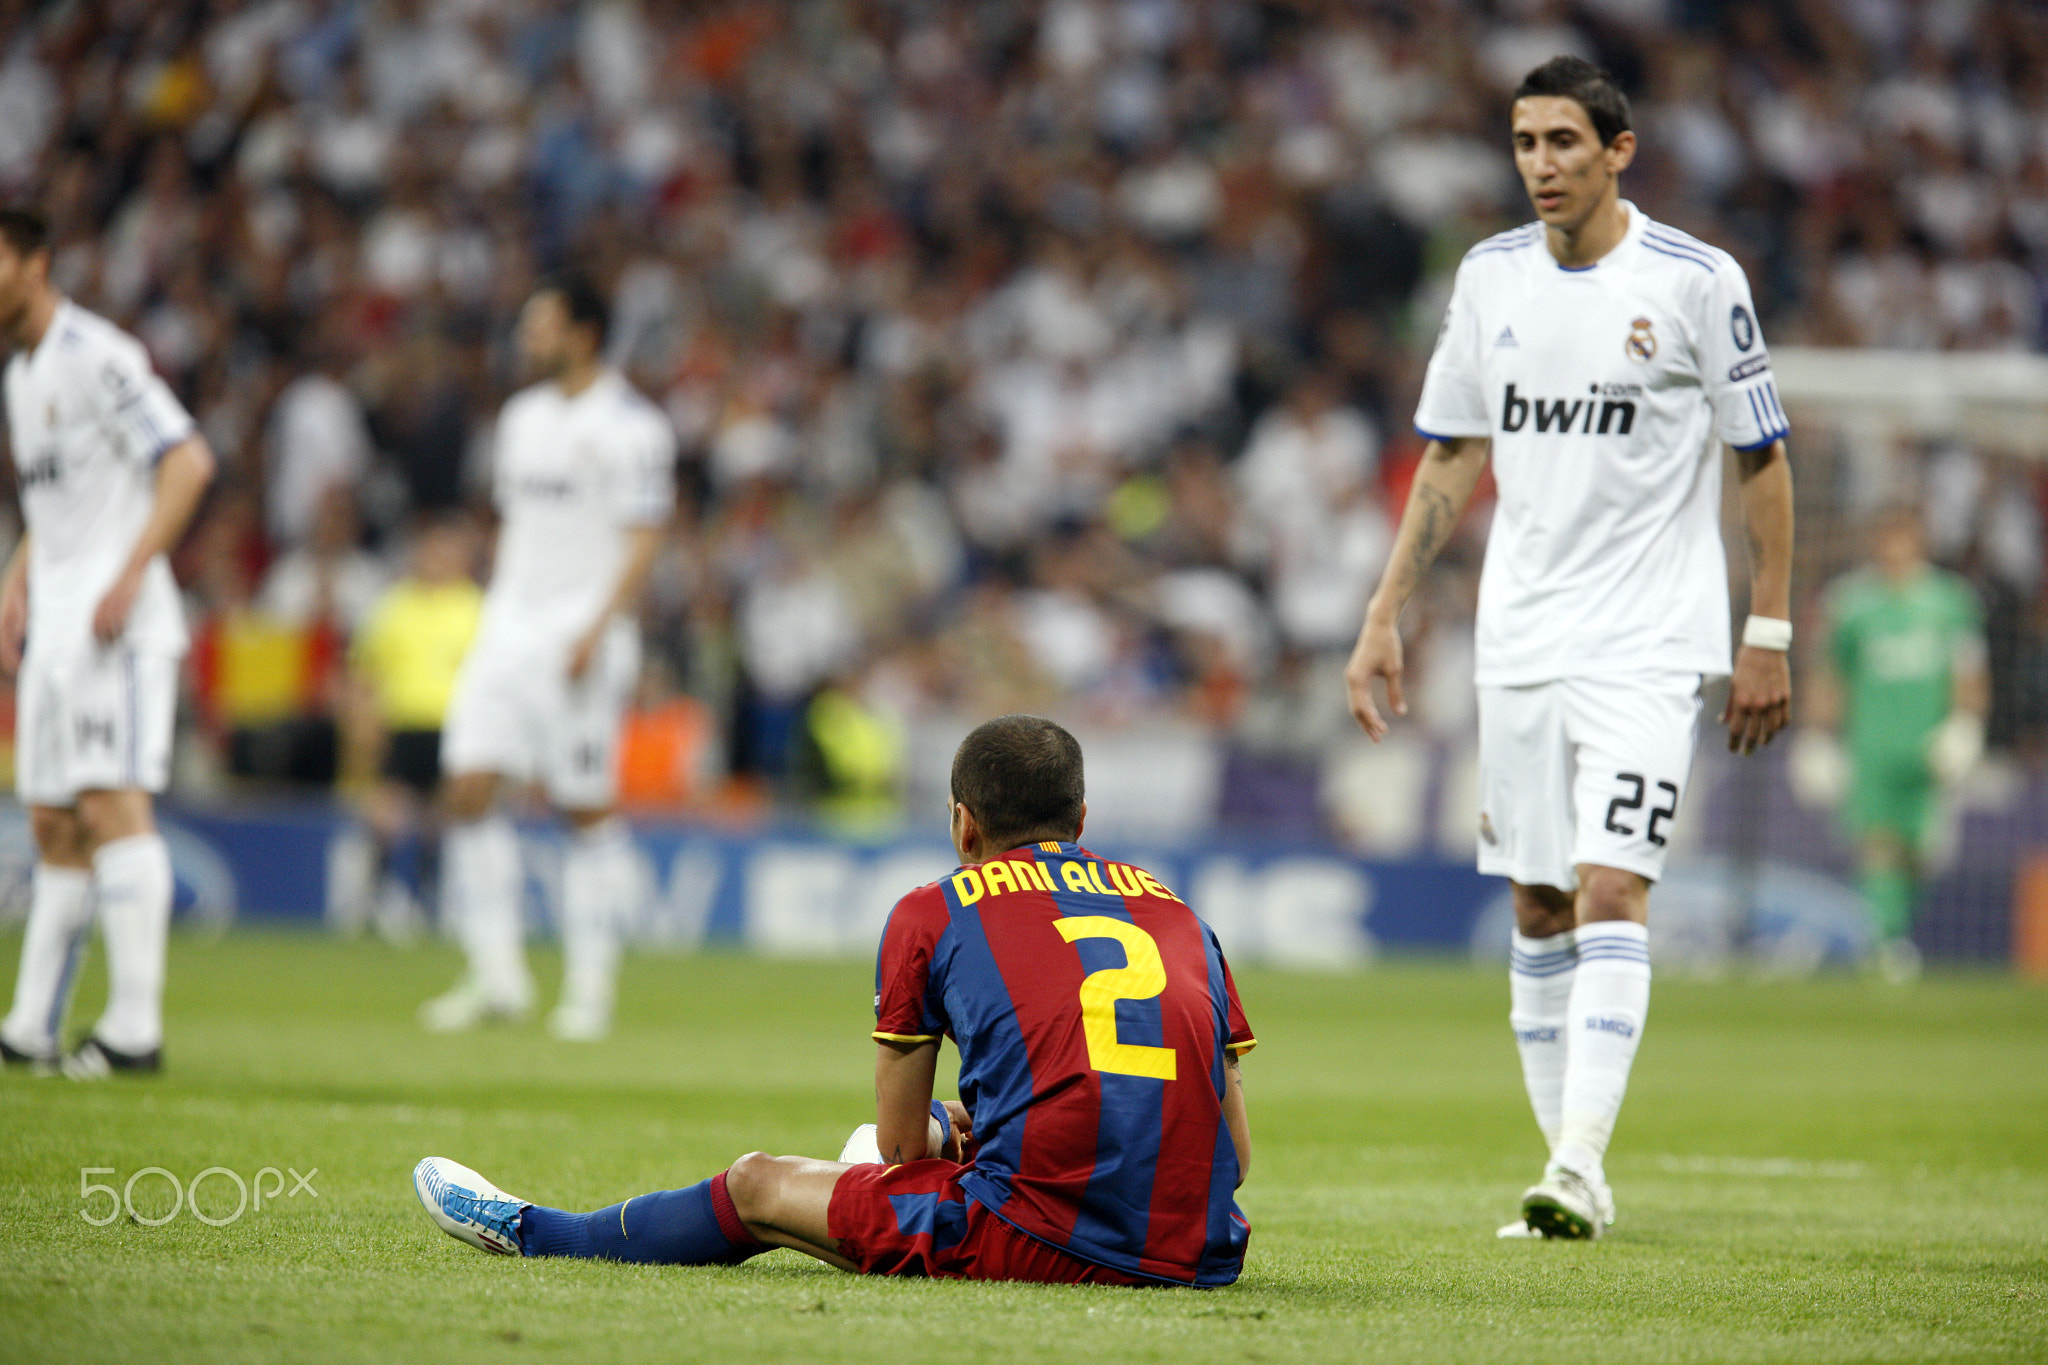 Alves sitting on the ground, UEFA Champions League Semifinals game between Real Madrid and FC Barcel